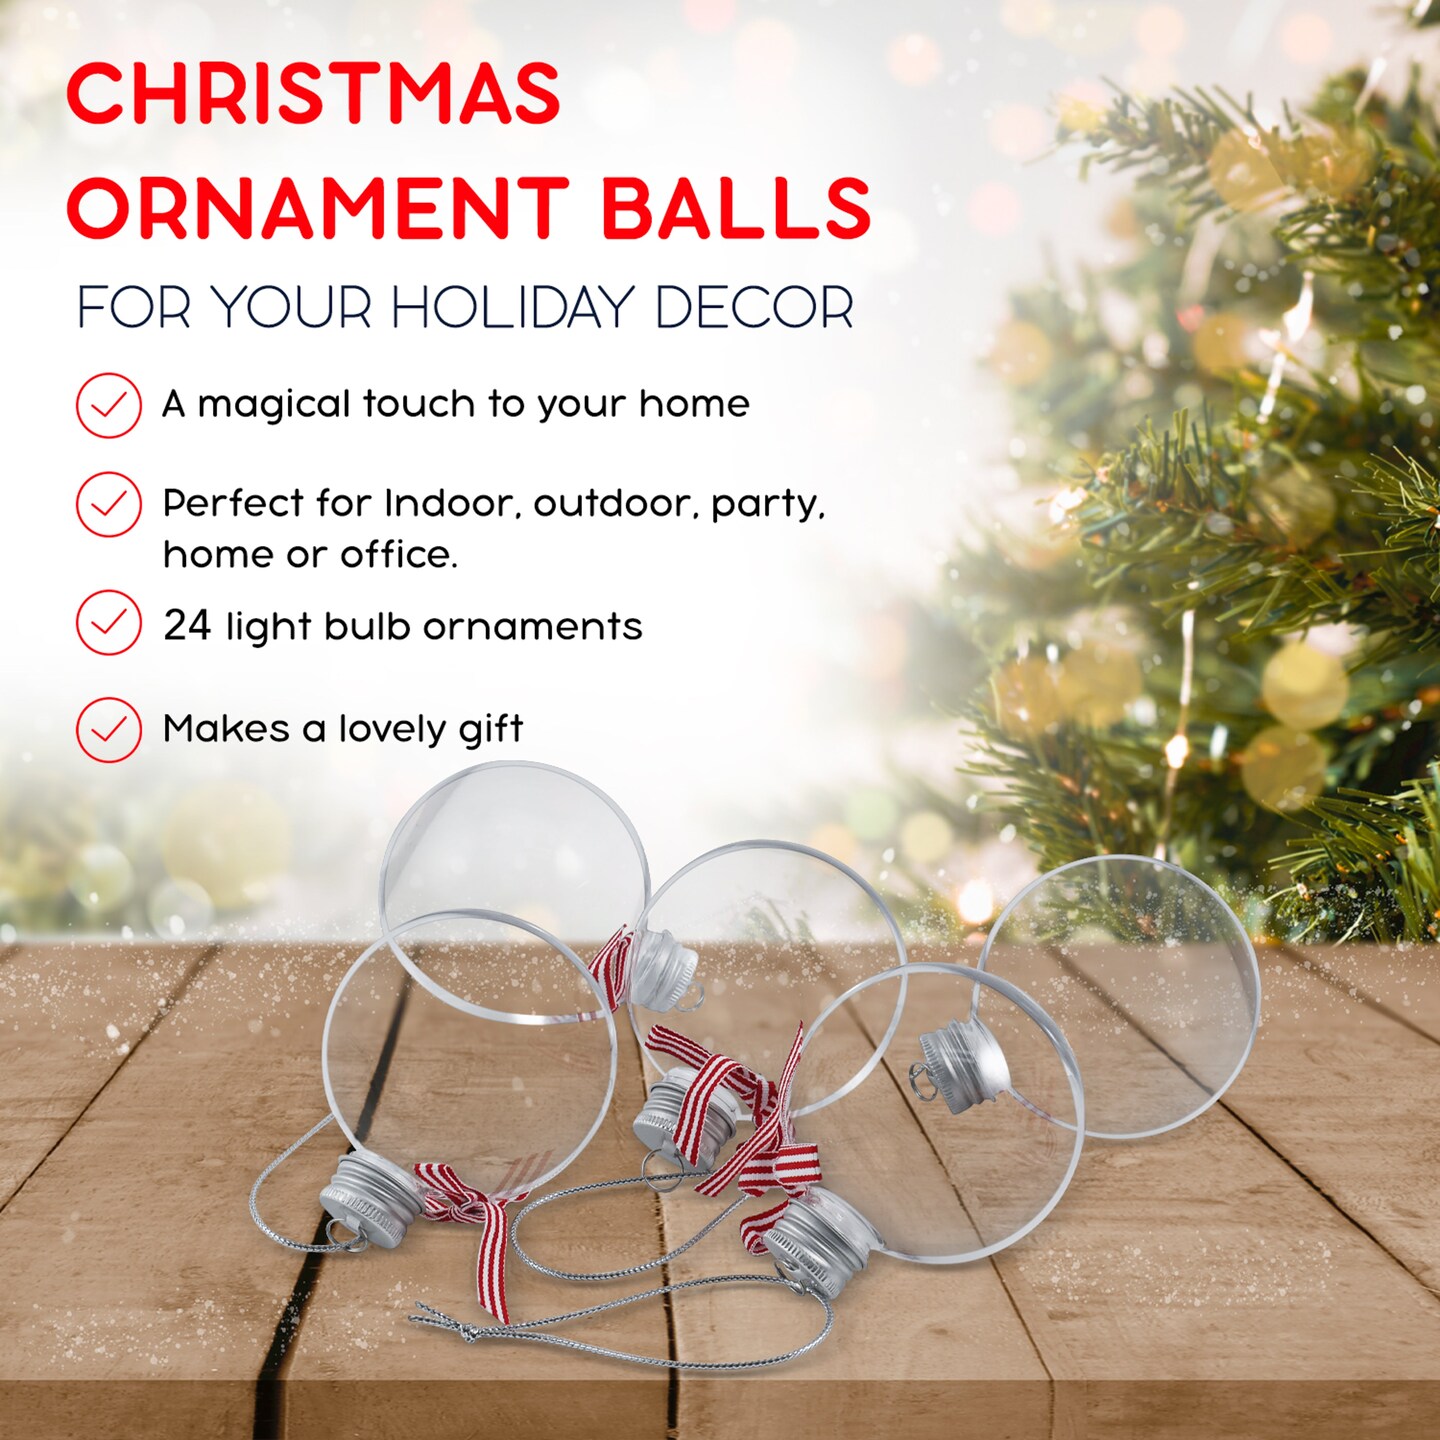 RN'D Toys Clear Fillable Ornaments - Shatterproof Transparent Plastic Craft Ornament Balls Decorations with Red and White Ribbon for DIY Christmas